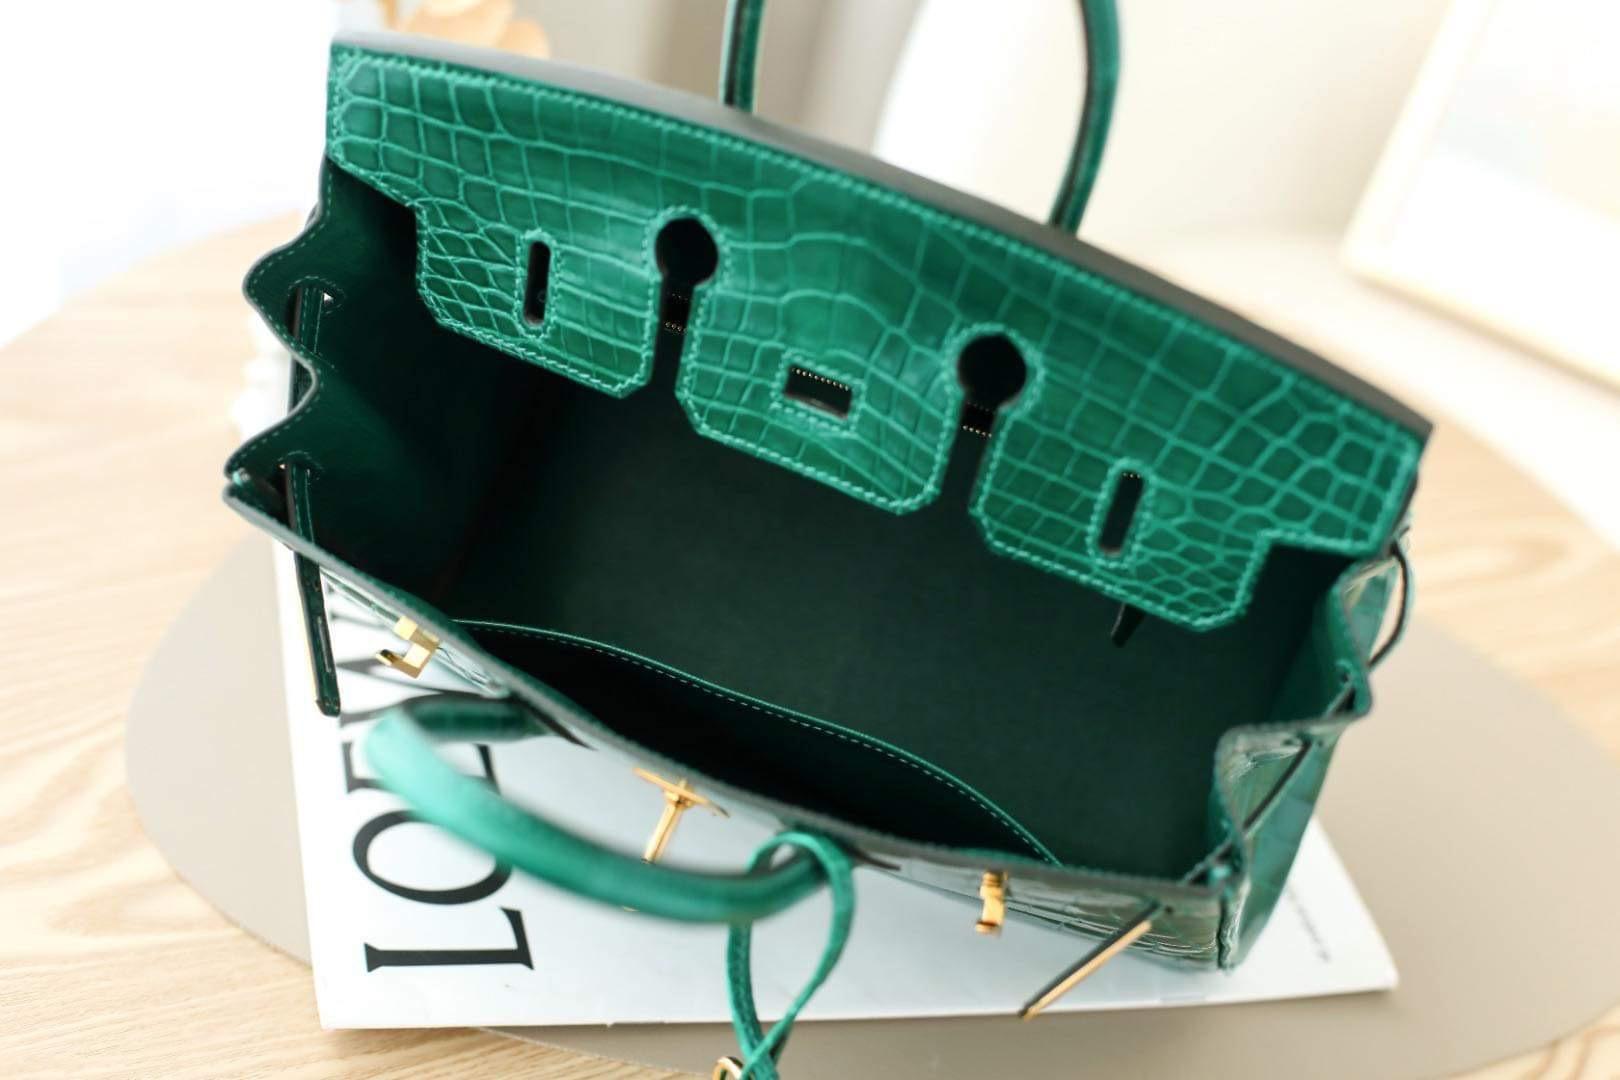 HERMÈS BIRKIN 30CM IN THE MOST BEAUTIFUL, AND IN ONE THE RAREST COLORS EMERALD GREEN (VERT EMERAUDE) NILOTIOCUS CROCODILE WITH GOLD HARDWARE. HERMÈS HAS CAPTURED PERFECTLY THE COLOR OF THE BEAUTIFUL EMERALD STONE. THE ULTIMATE BAG TO OWN! MAKE A